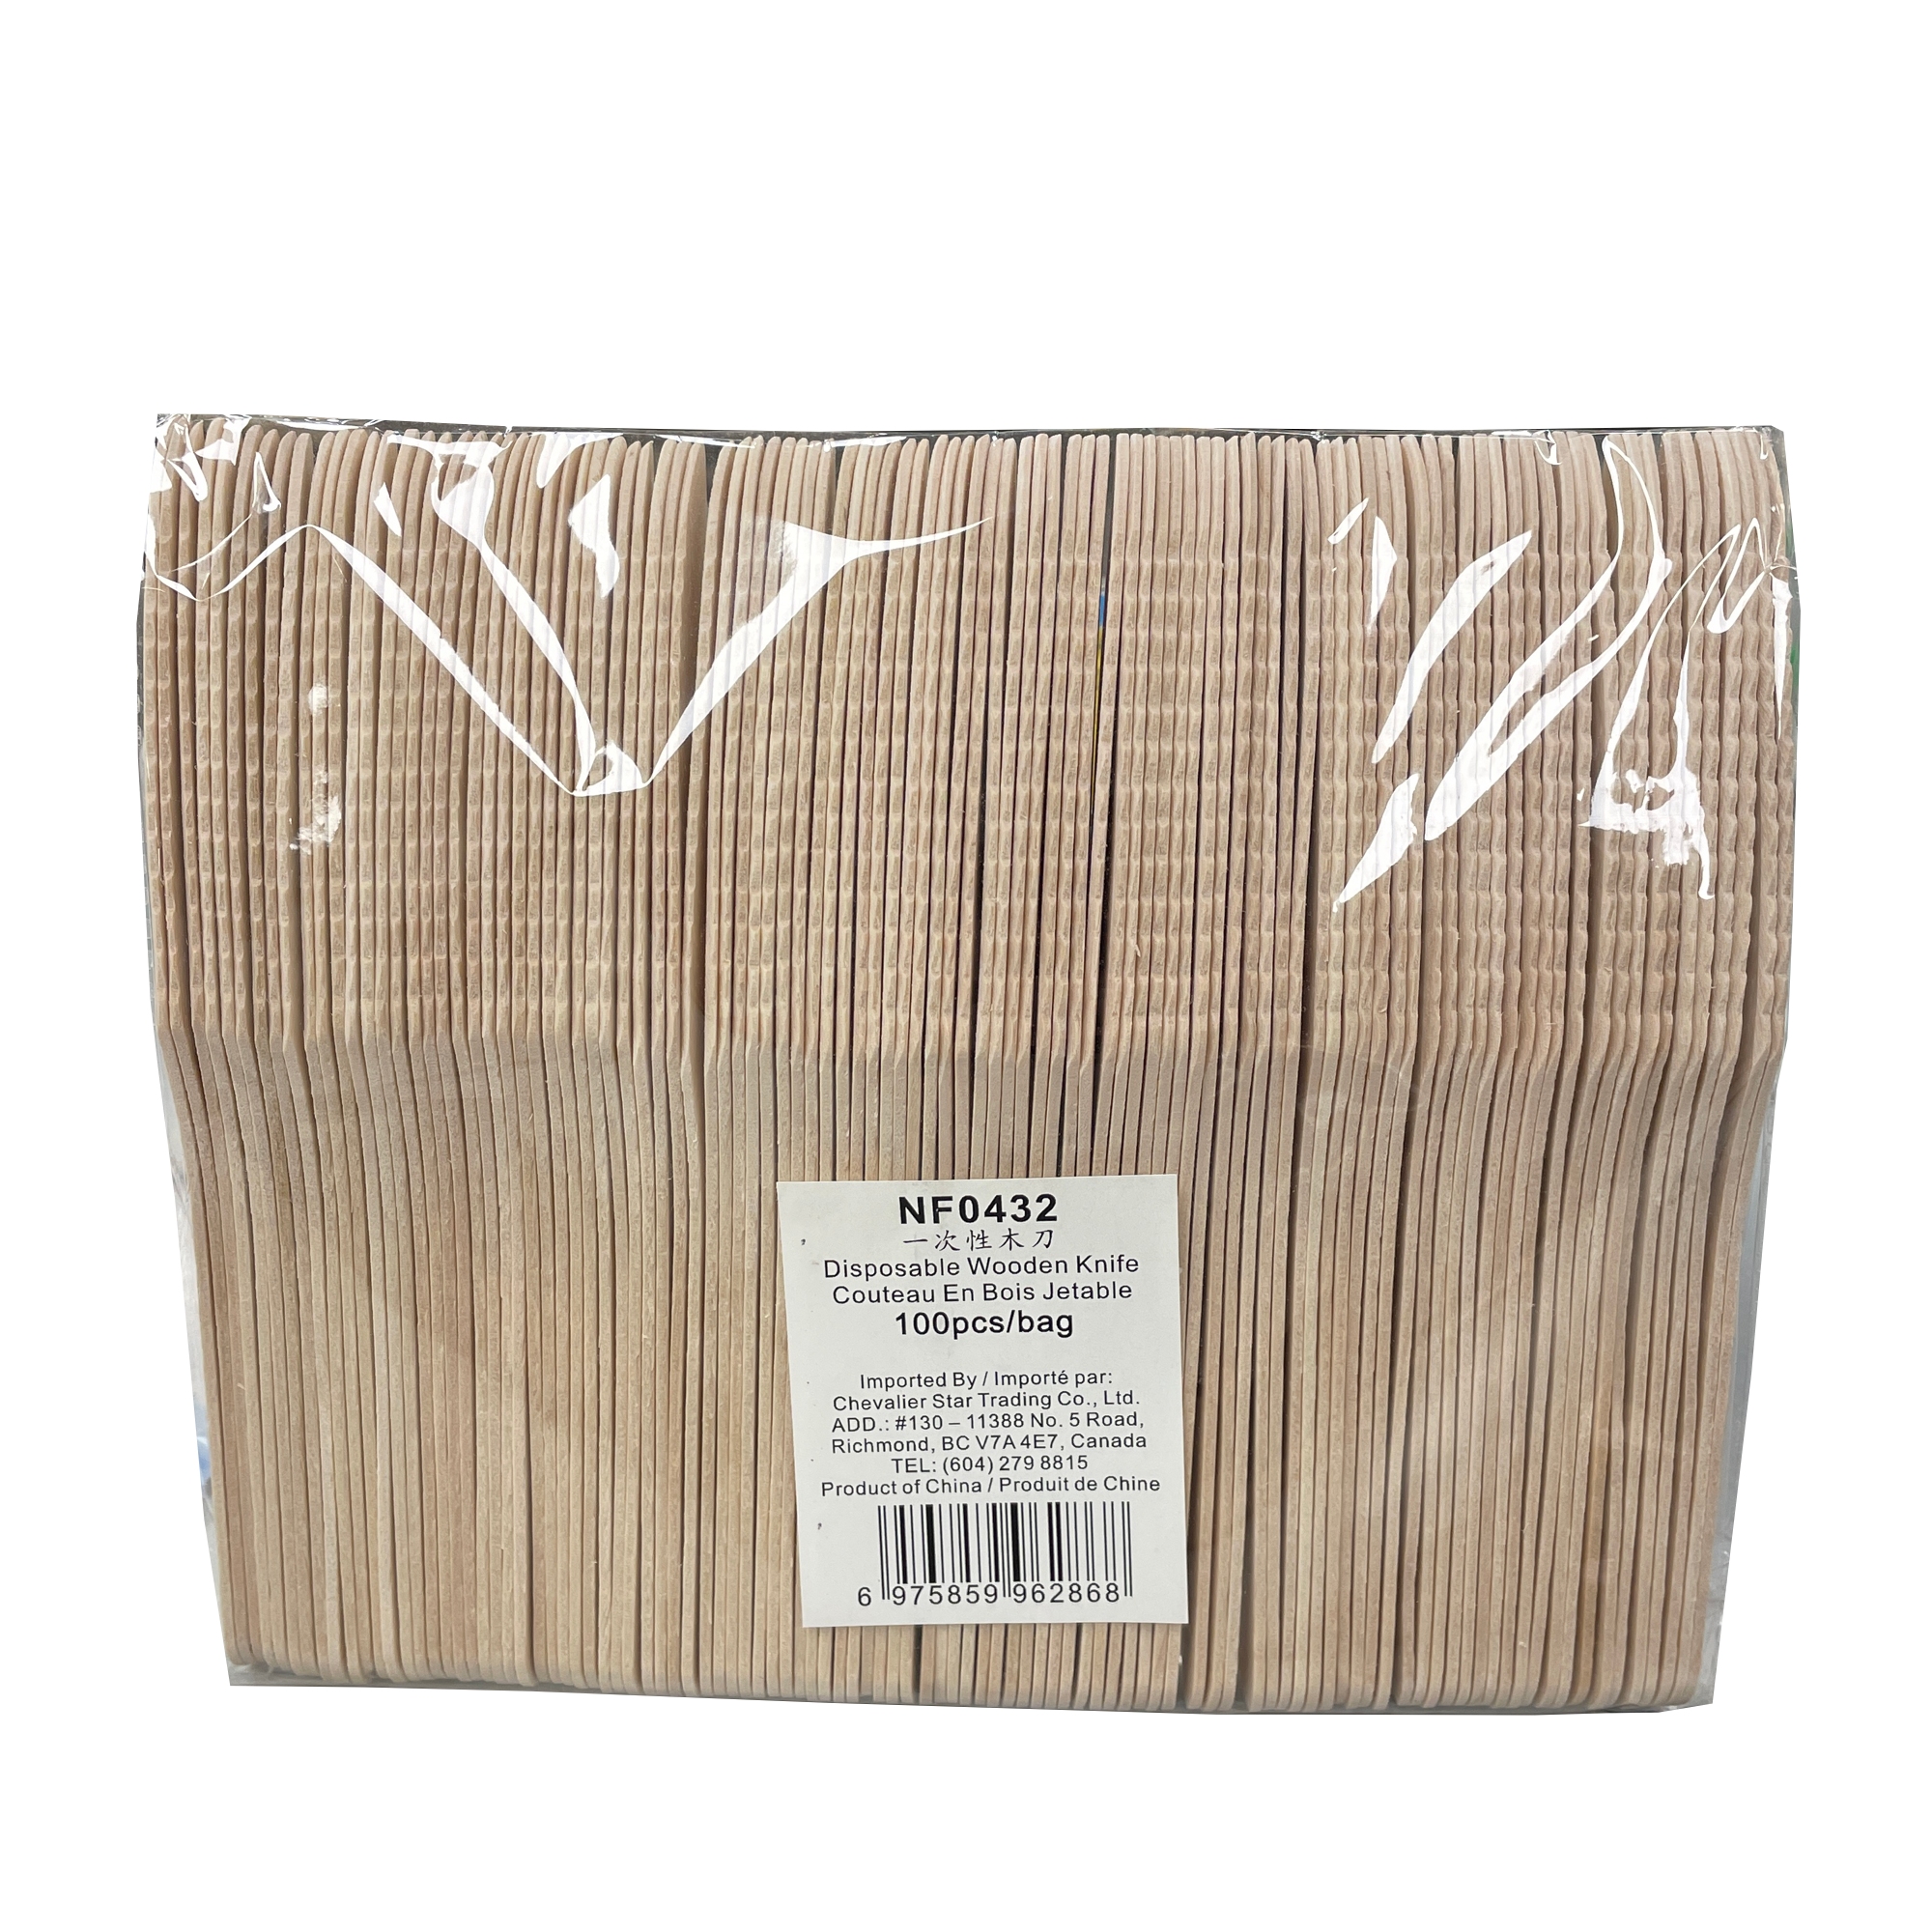 DISPOSABLE WOODEN KNIVES NF0432